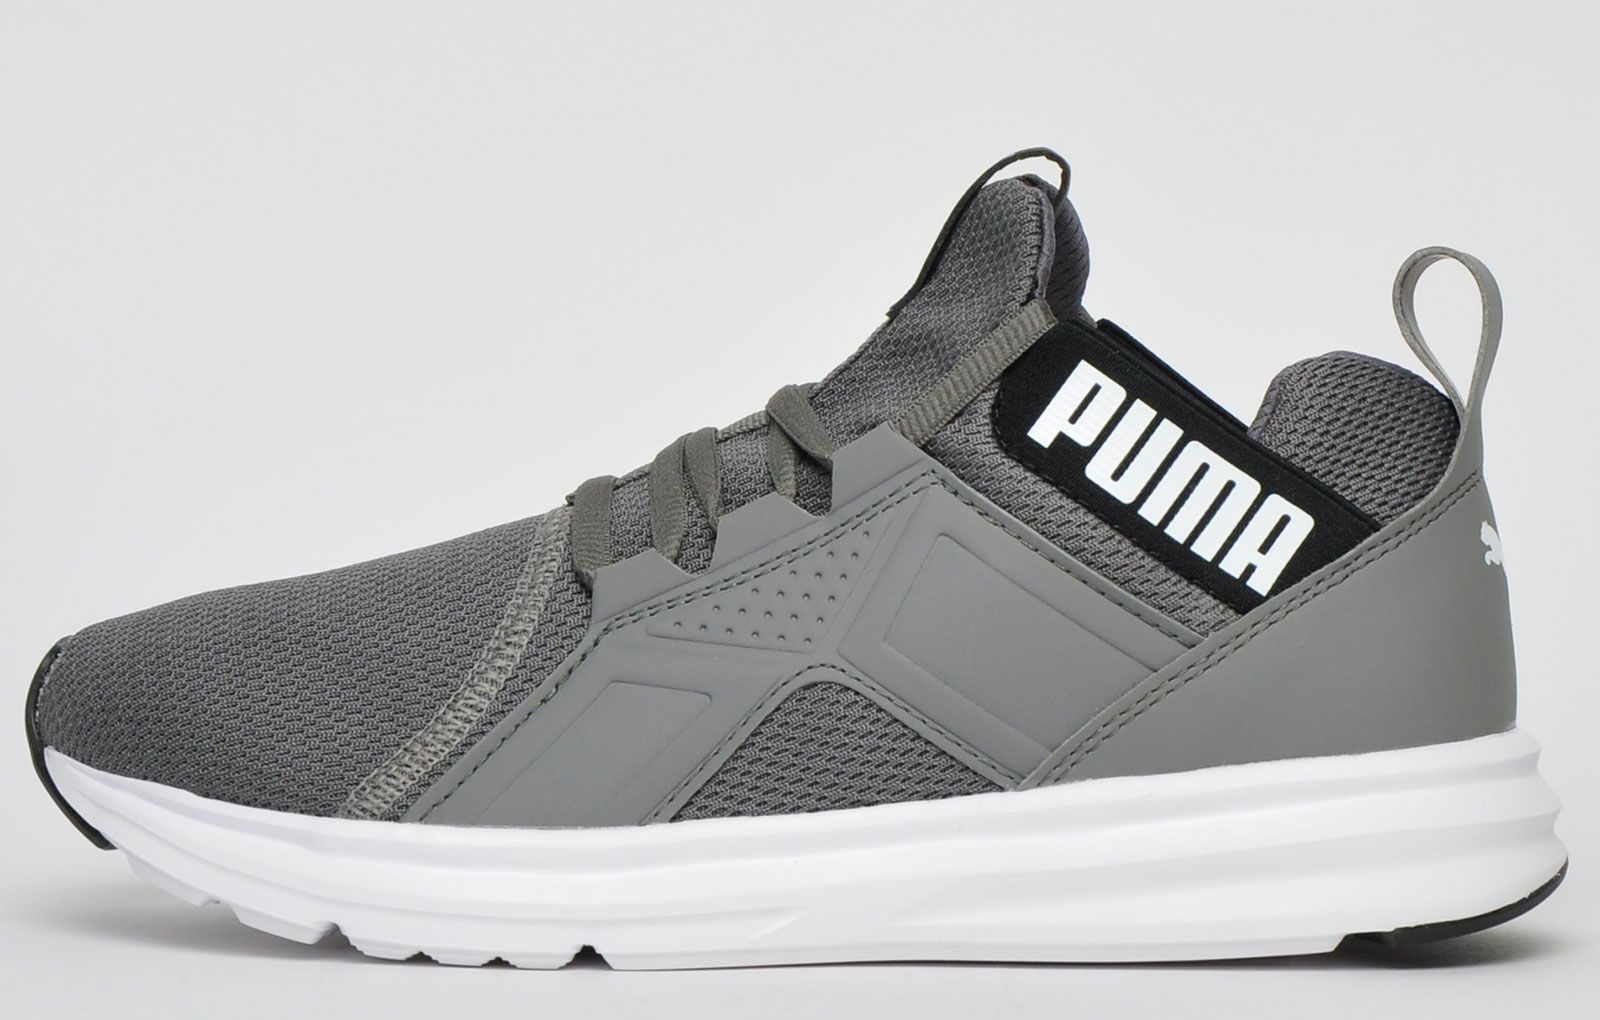 <p>The Puma Enzo was designed as a lightweight workout shoe featuring a breathable mesh upper with an exaggerated tongue and collar to provide ankle support and style.</p> <p>Featuring a synthetic material that works as an external heel counter holding the foot steady during aggressive exercise with an EVA foam midsole keeping the foot comfortable and protected by absorbing the shock.</p> <p>A SoftFoam sock liner provides soft, plush cushioning under the foot whilst the durable outsole with flex grooves delivers additional durability and traction</p> <p>- Textile mesh synthetic mixupper</p> <p>- External heel counter for heel lockdown</p> <p>- Integrated lacing system </p> <p>- SoftFoam sock liner</p> <p>- EVA foam midsole for shock absorption</p> <p>- Midfoot strap for additional support and lock down fit</p> <p>- Padded heel collar with heel tab</p> <p>- Heel loop for easy on off wear</p> <p>- Puma branding throughout</p>